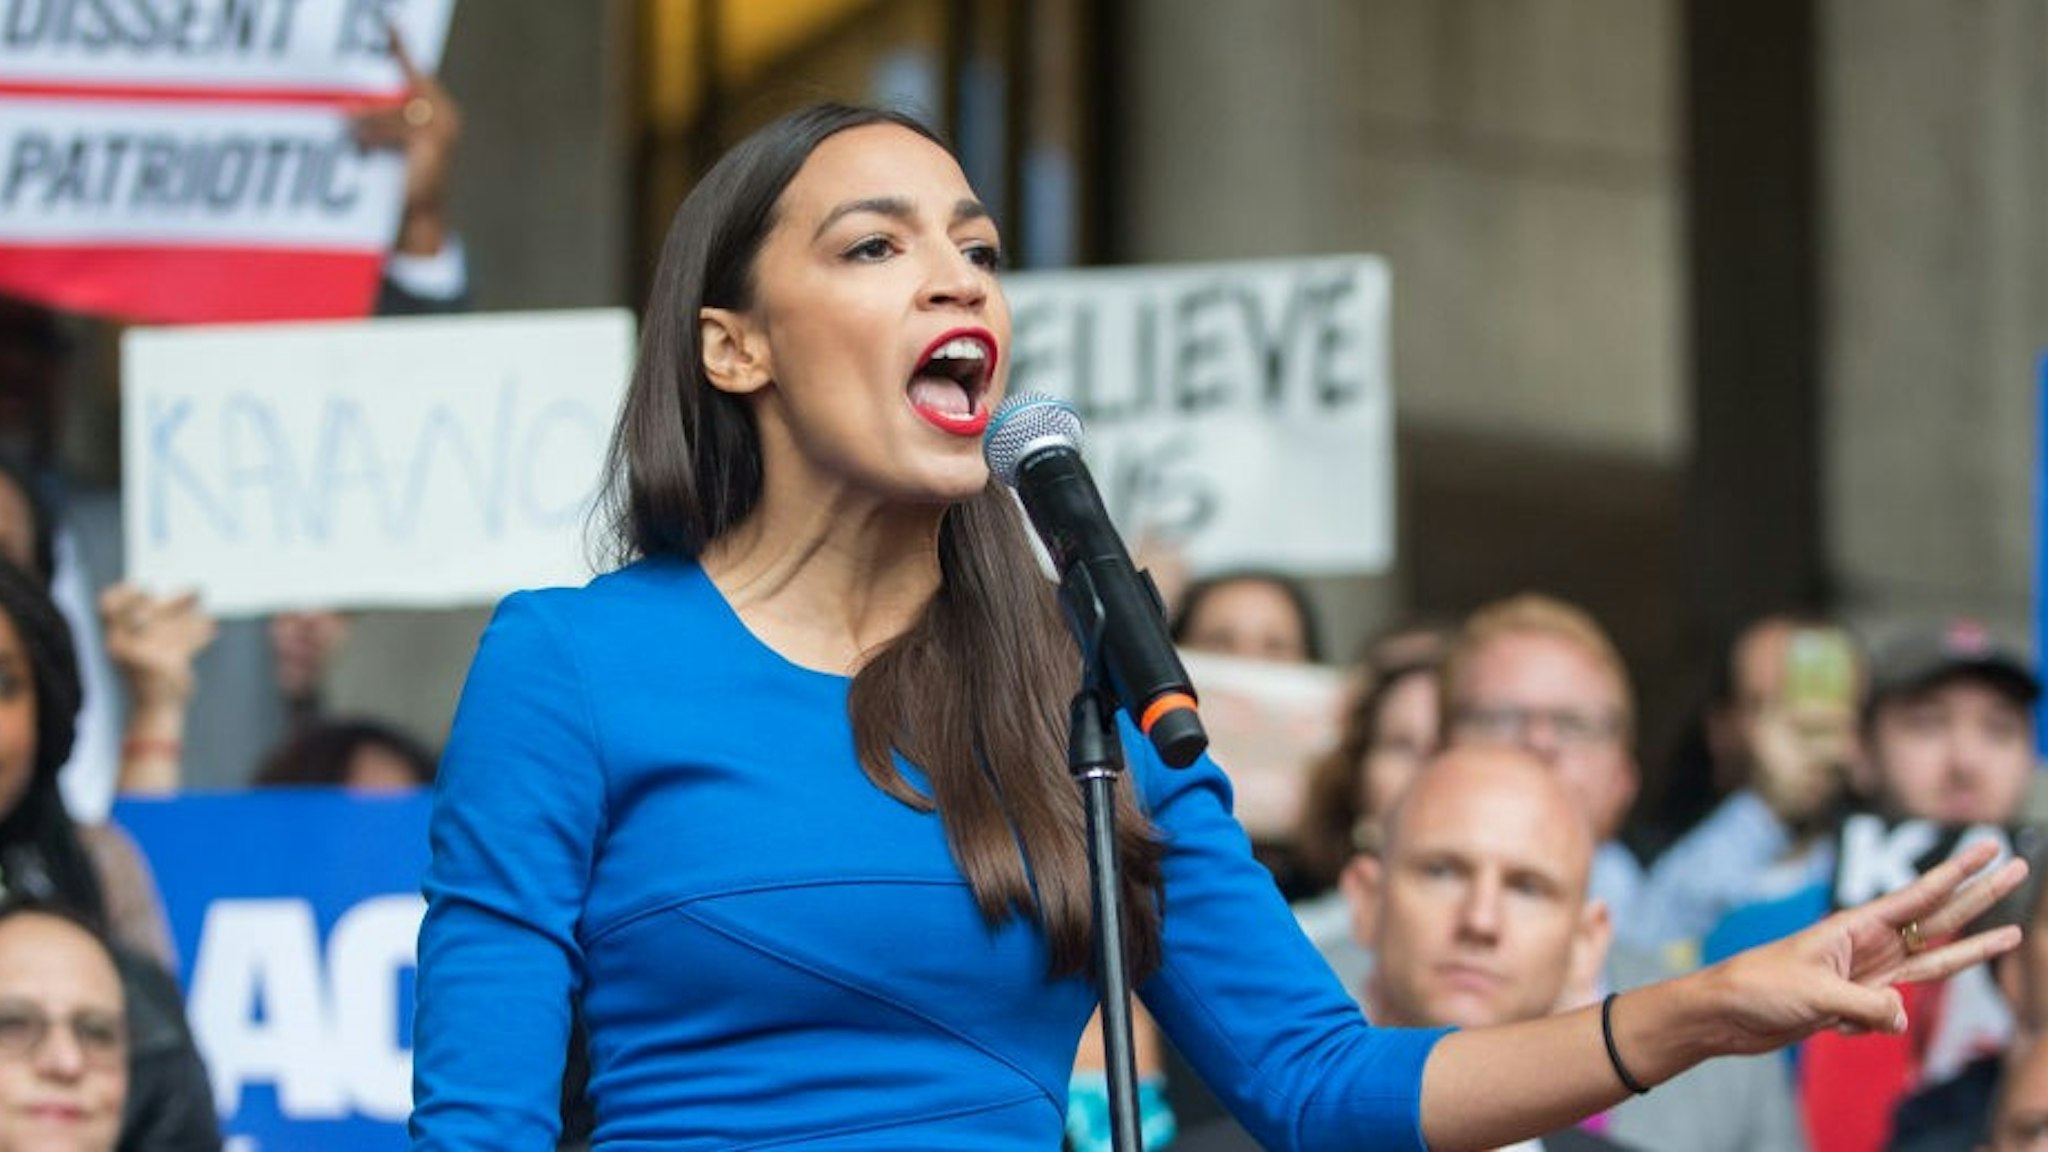 BOSTON, MA - OCTOBER 01: New York Democratic congressional candidate Alexandria Ocasio-Cortez speaks at a rally calling on Sen. Jeff Flake (R-AZ) to reject Judge Brett Kavanaugh's nomination to the Supreme Court on October 1, 2018 in Boston, Massachusetts. Sen. Flake is scheduled to give a talk at the Forbes 30 under 30 event in Boston after recently calling for a one week pause in the confirmation process to give the FBI more time to investigate sexual assault allegations.